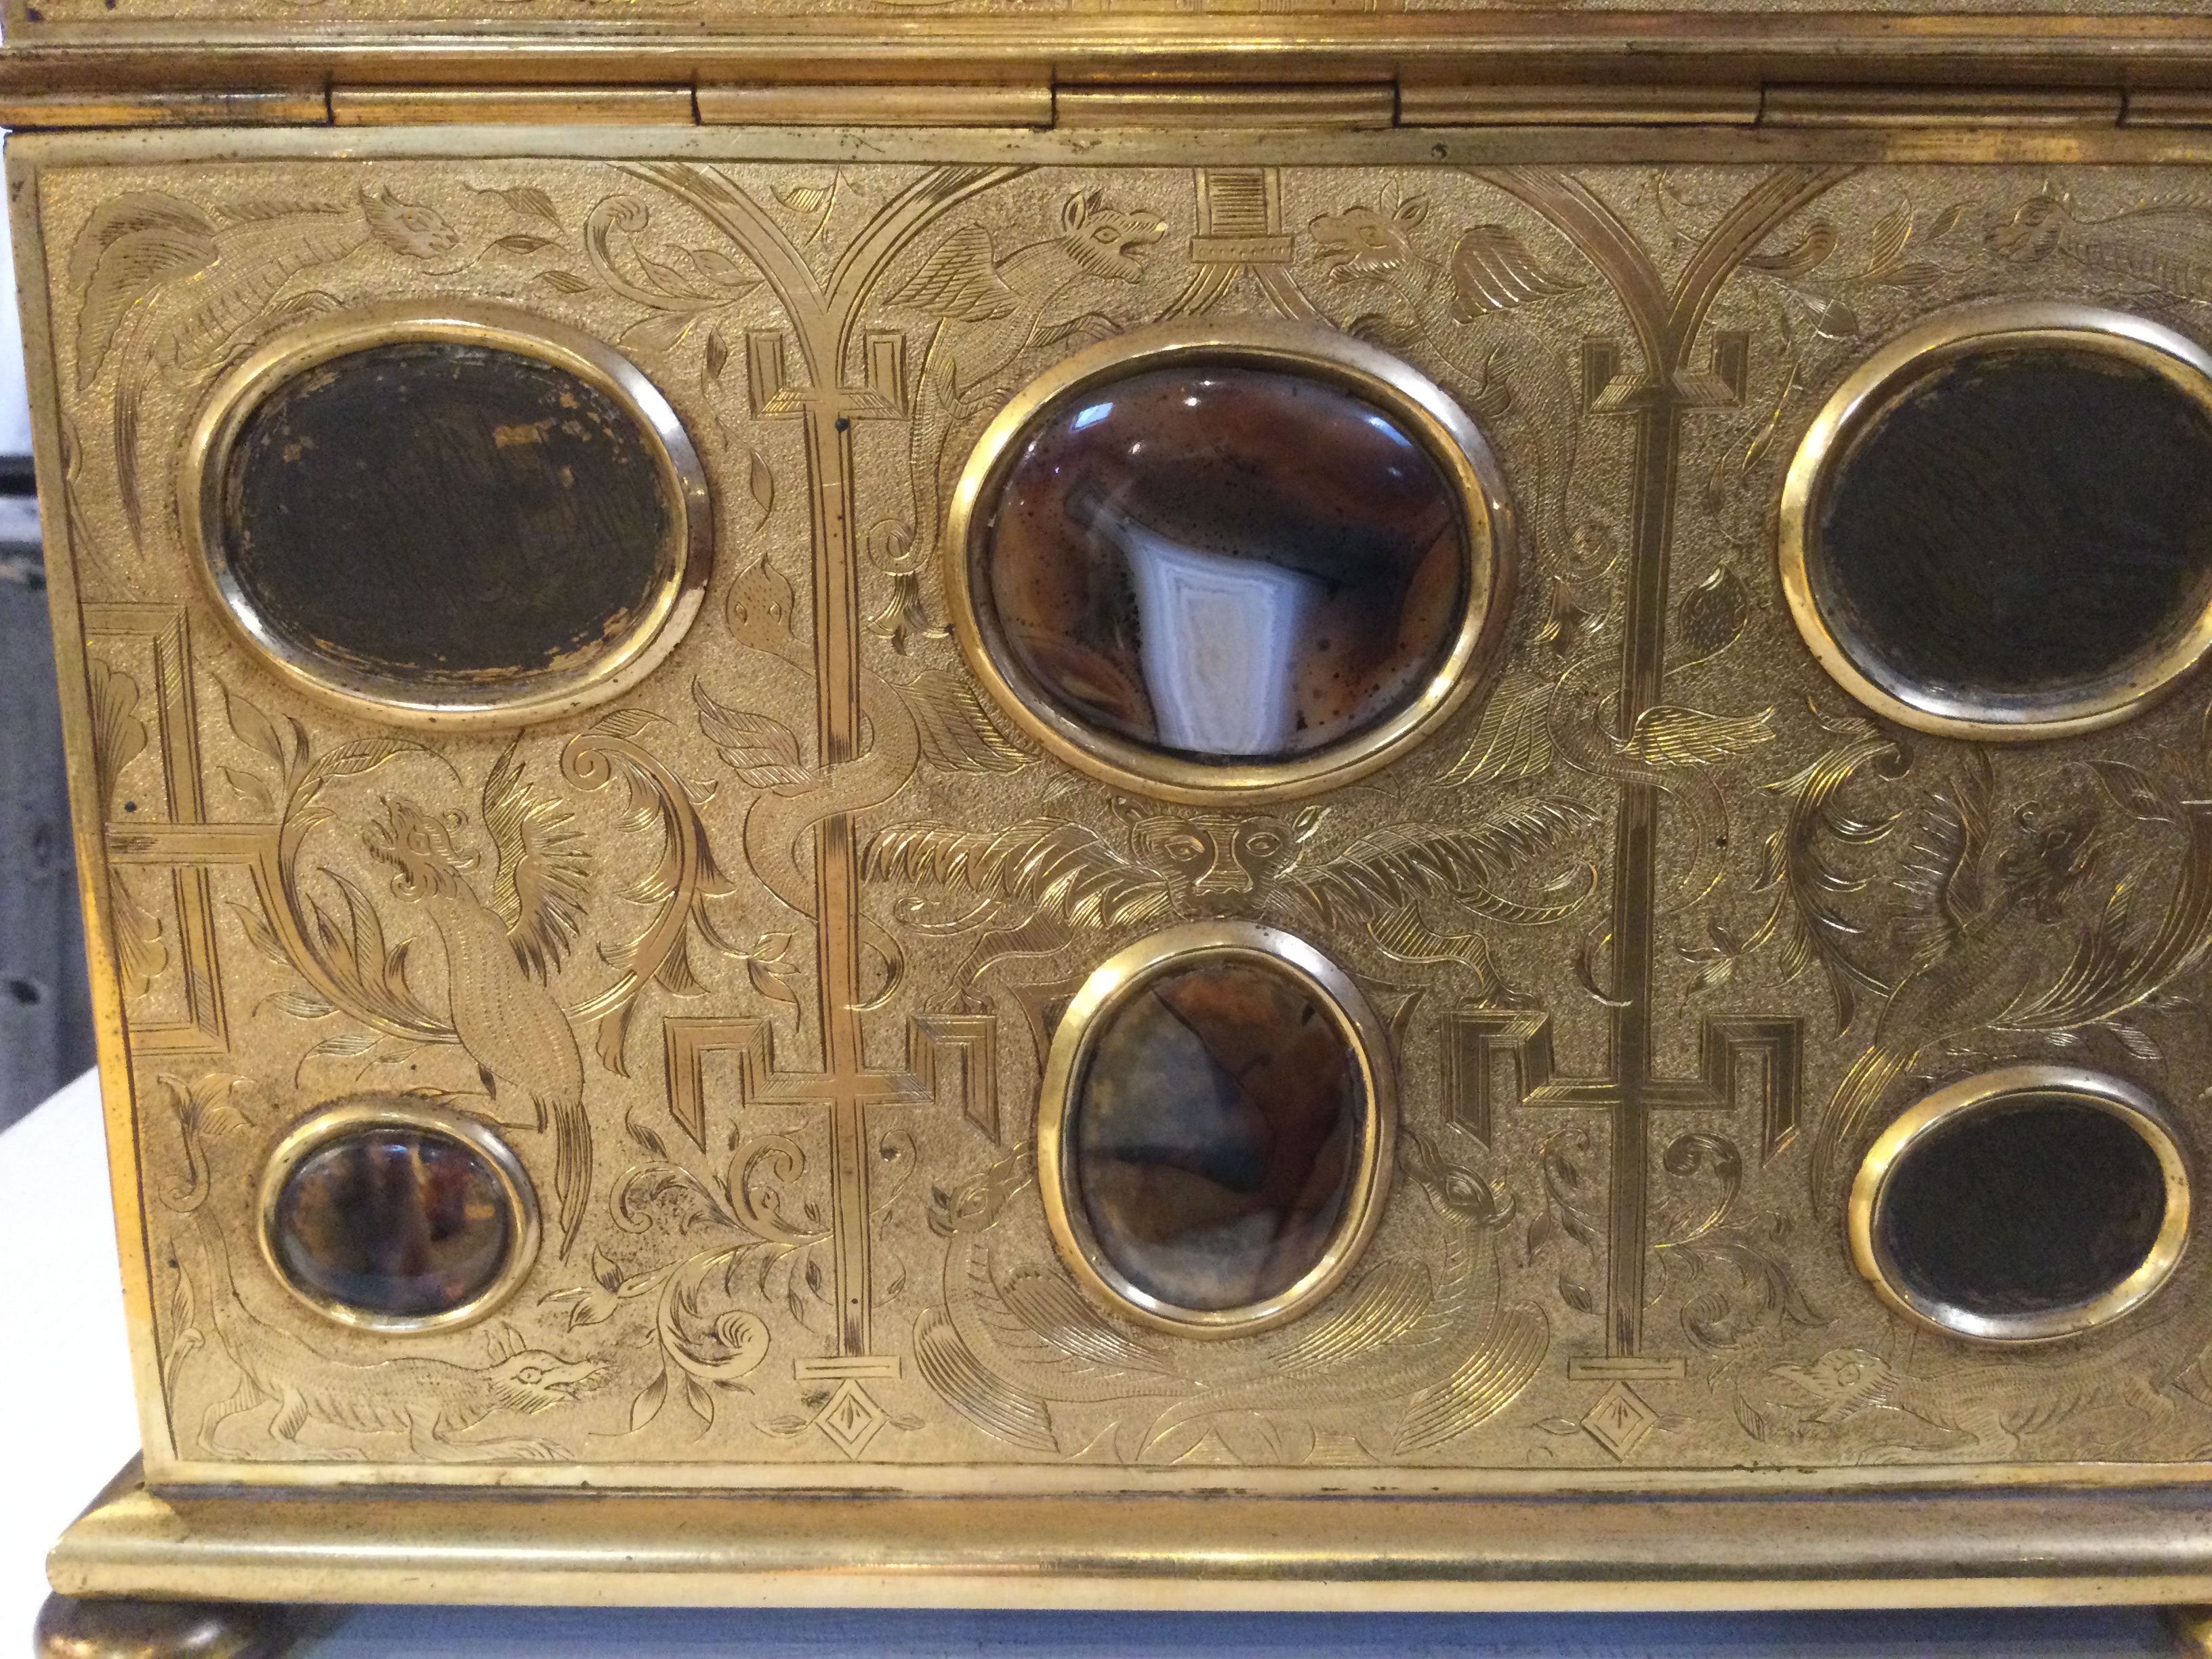 A 19th century correspondence gilt box with engraved decoration and inset cabochon stones hardstones - Image 12 of 25